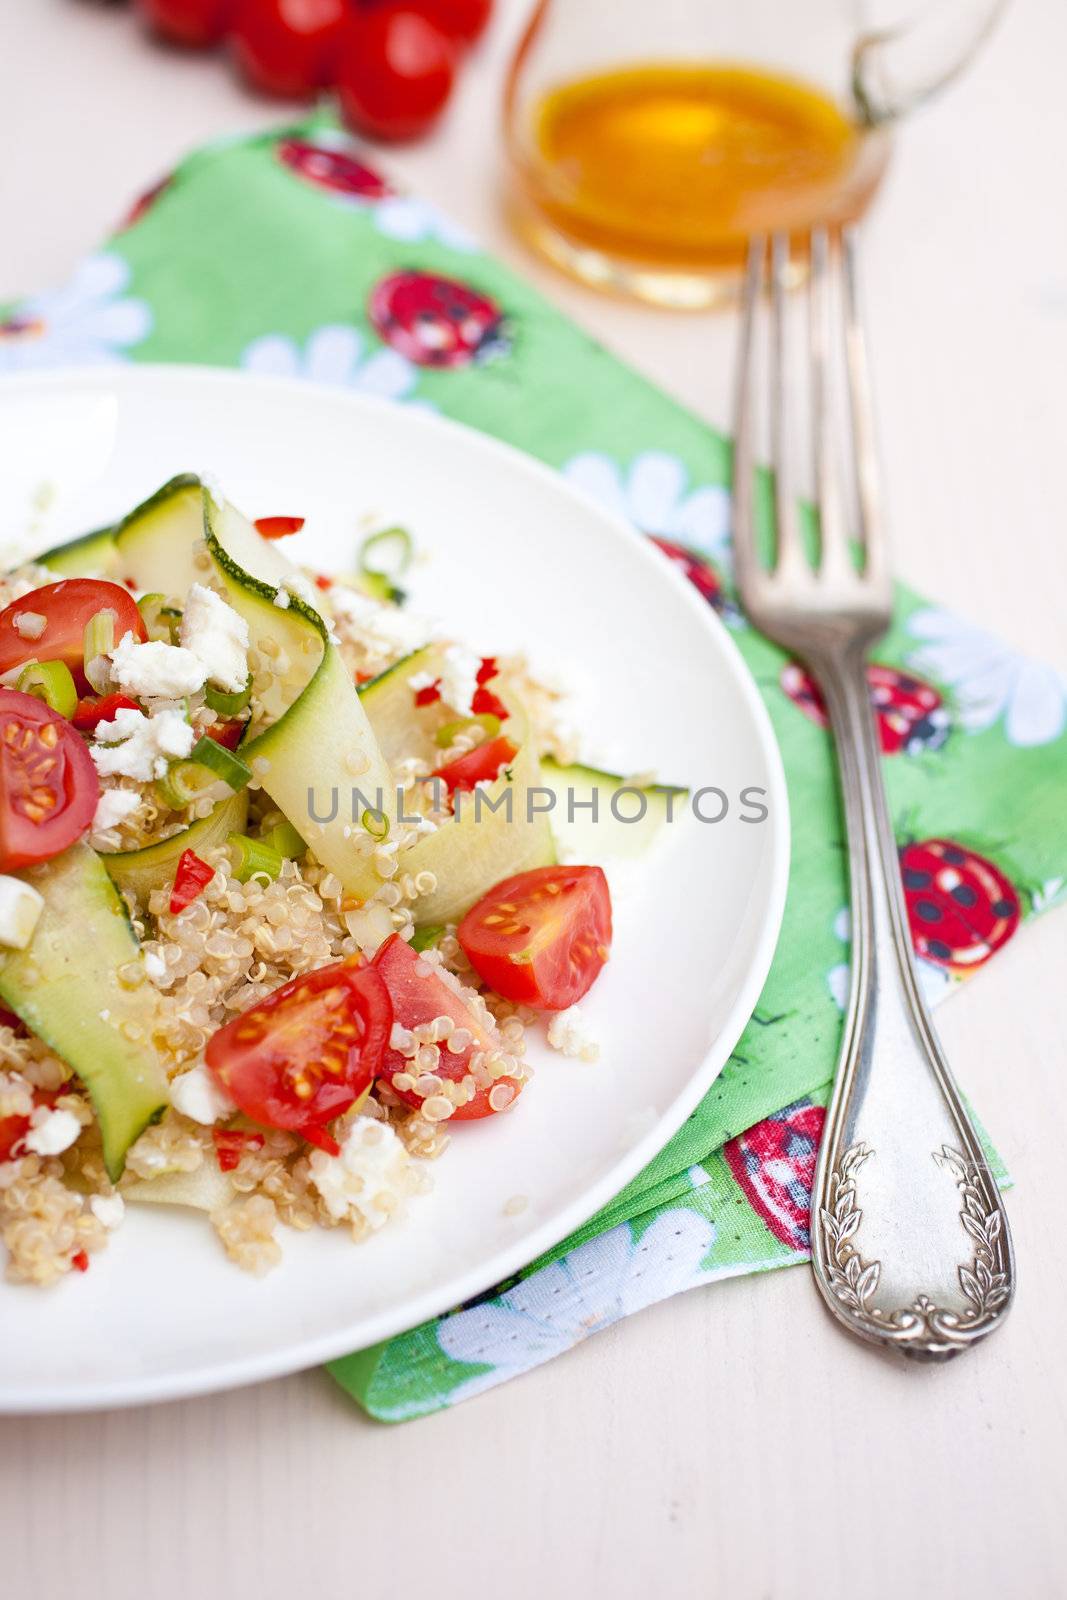 Refreshing and healthy quinoa salad with zucchini and tomatoes